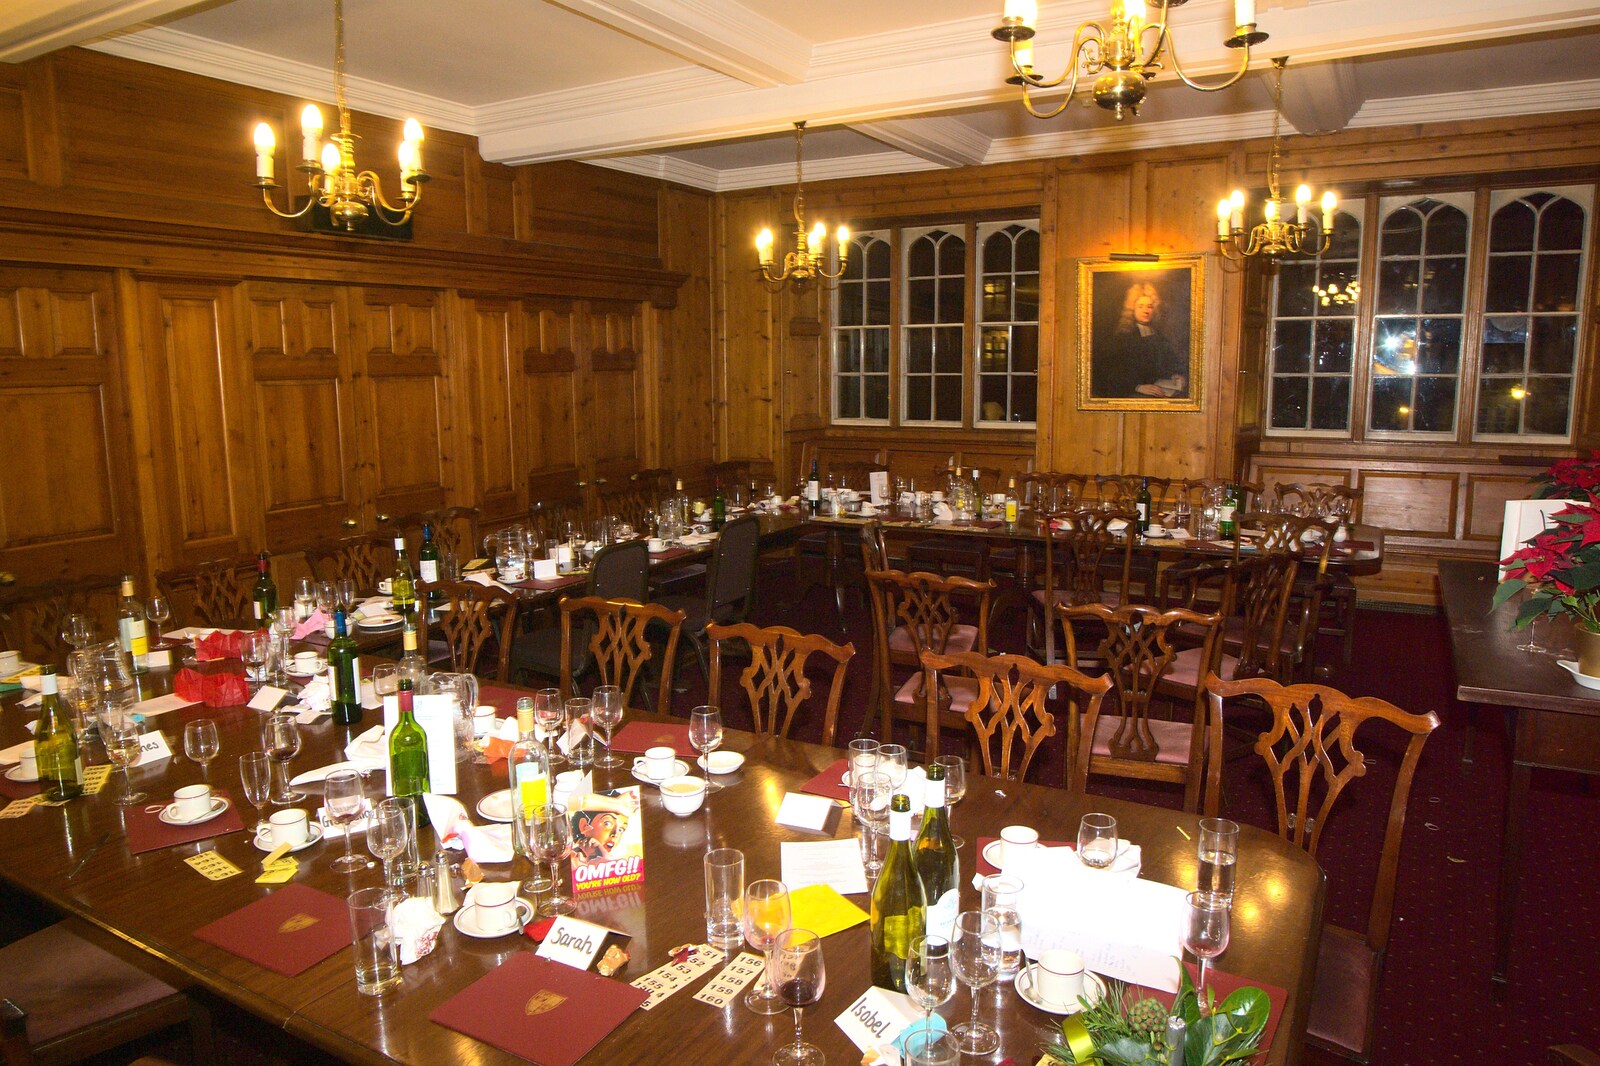 The empty, partly devastated, room from A Qualcomm Christmas, Christ's College, Cambridge - 8th December 2011